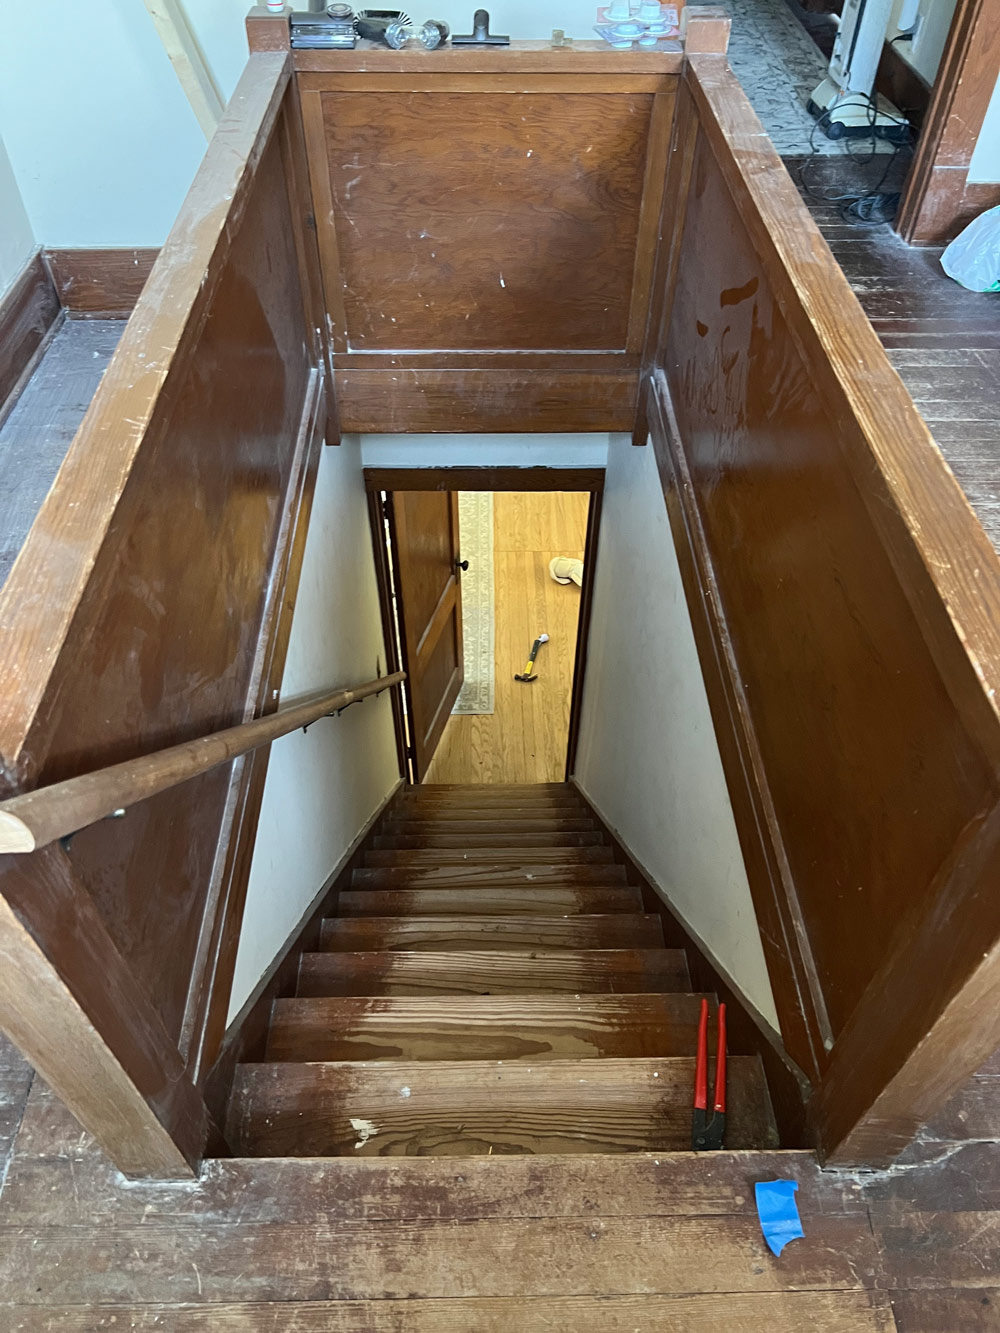 Close-up of stairs before the renovation.